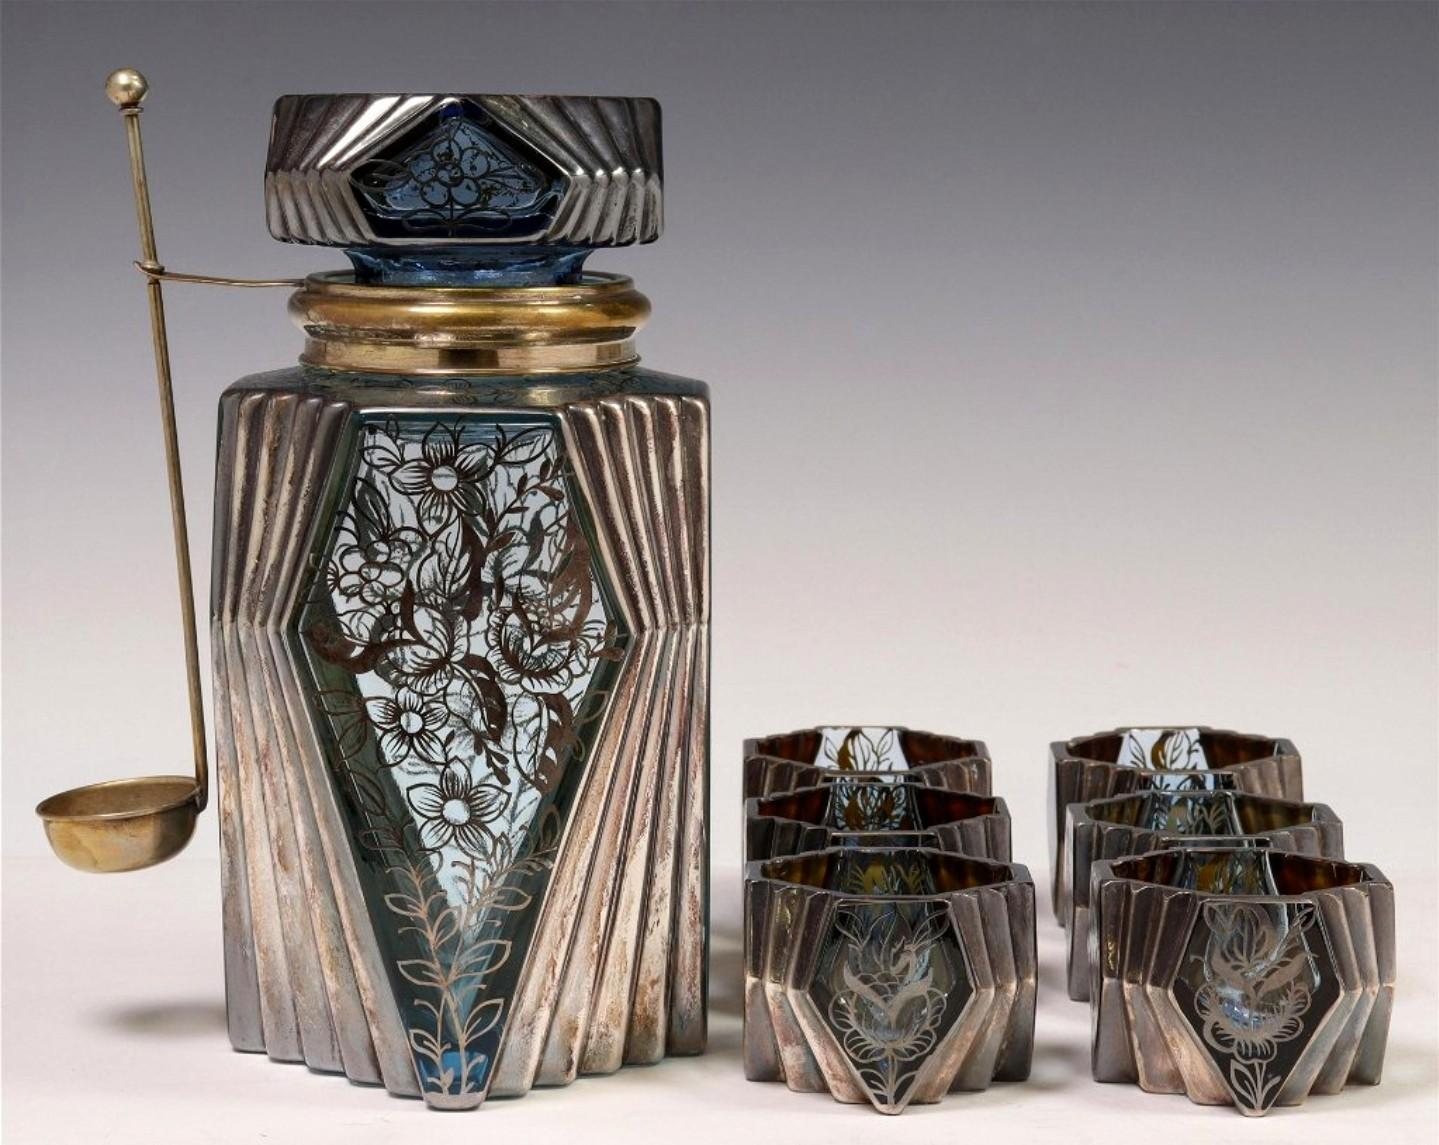 A spectacular period Art Deco Czechoslovakian art glass silver overlay liqueur service set.

Add a touch of refined elegance, warmth and sophistication to any bar with this fine quality hand-blown Bohemian (present day Czech Republic) liqueur set,